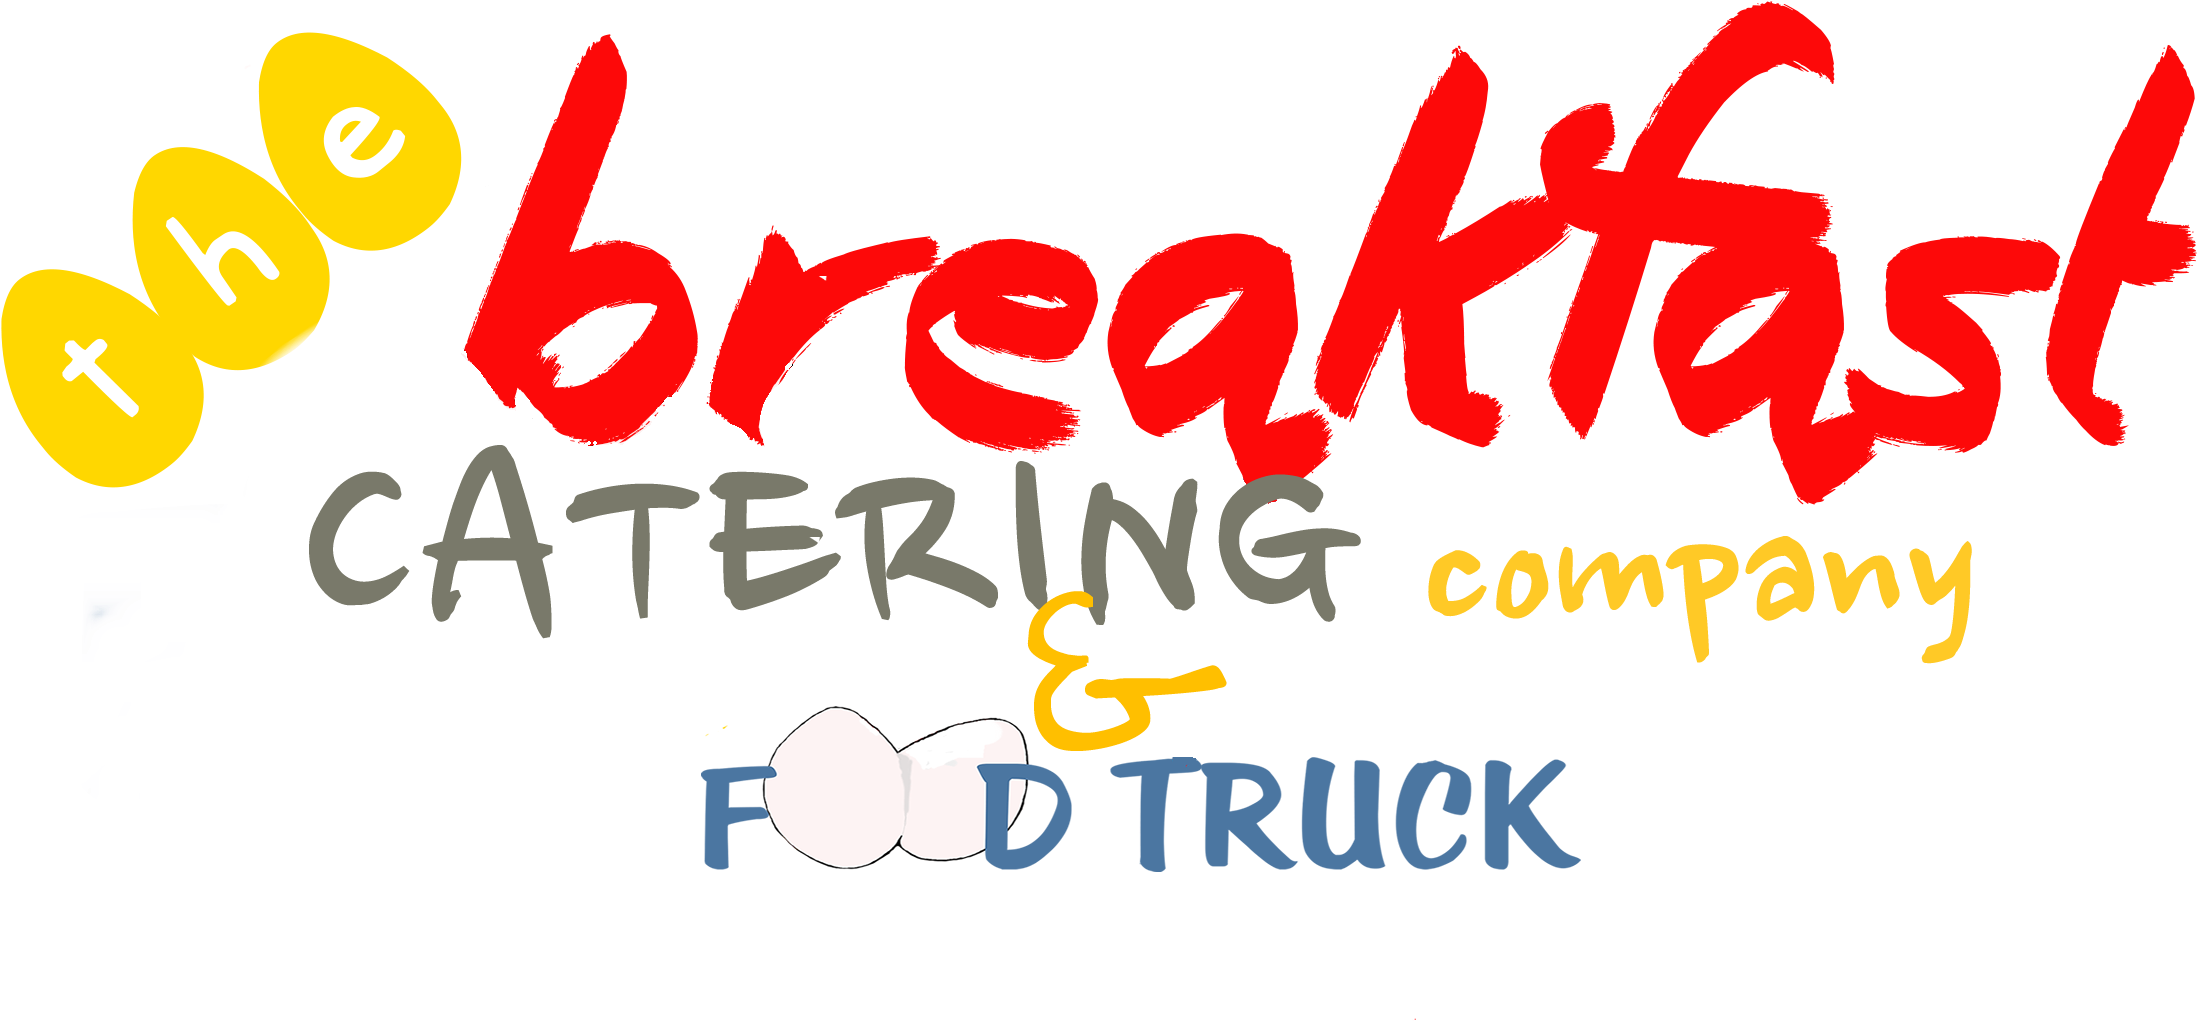 The Breakfast Catering Company & Food Truck - Calligraphy (2368x1232)